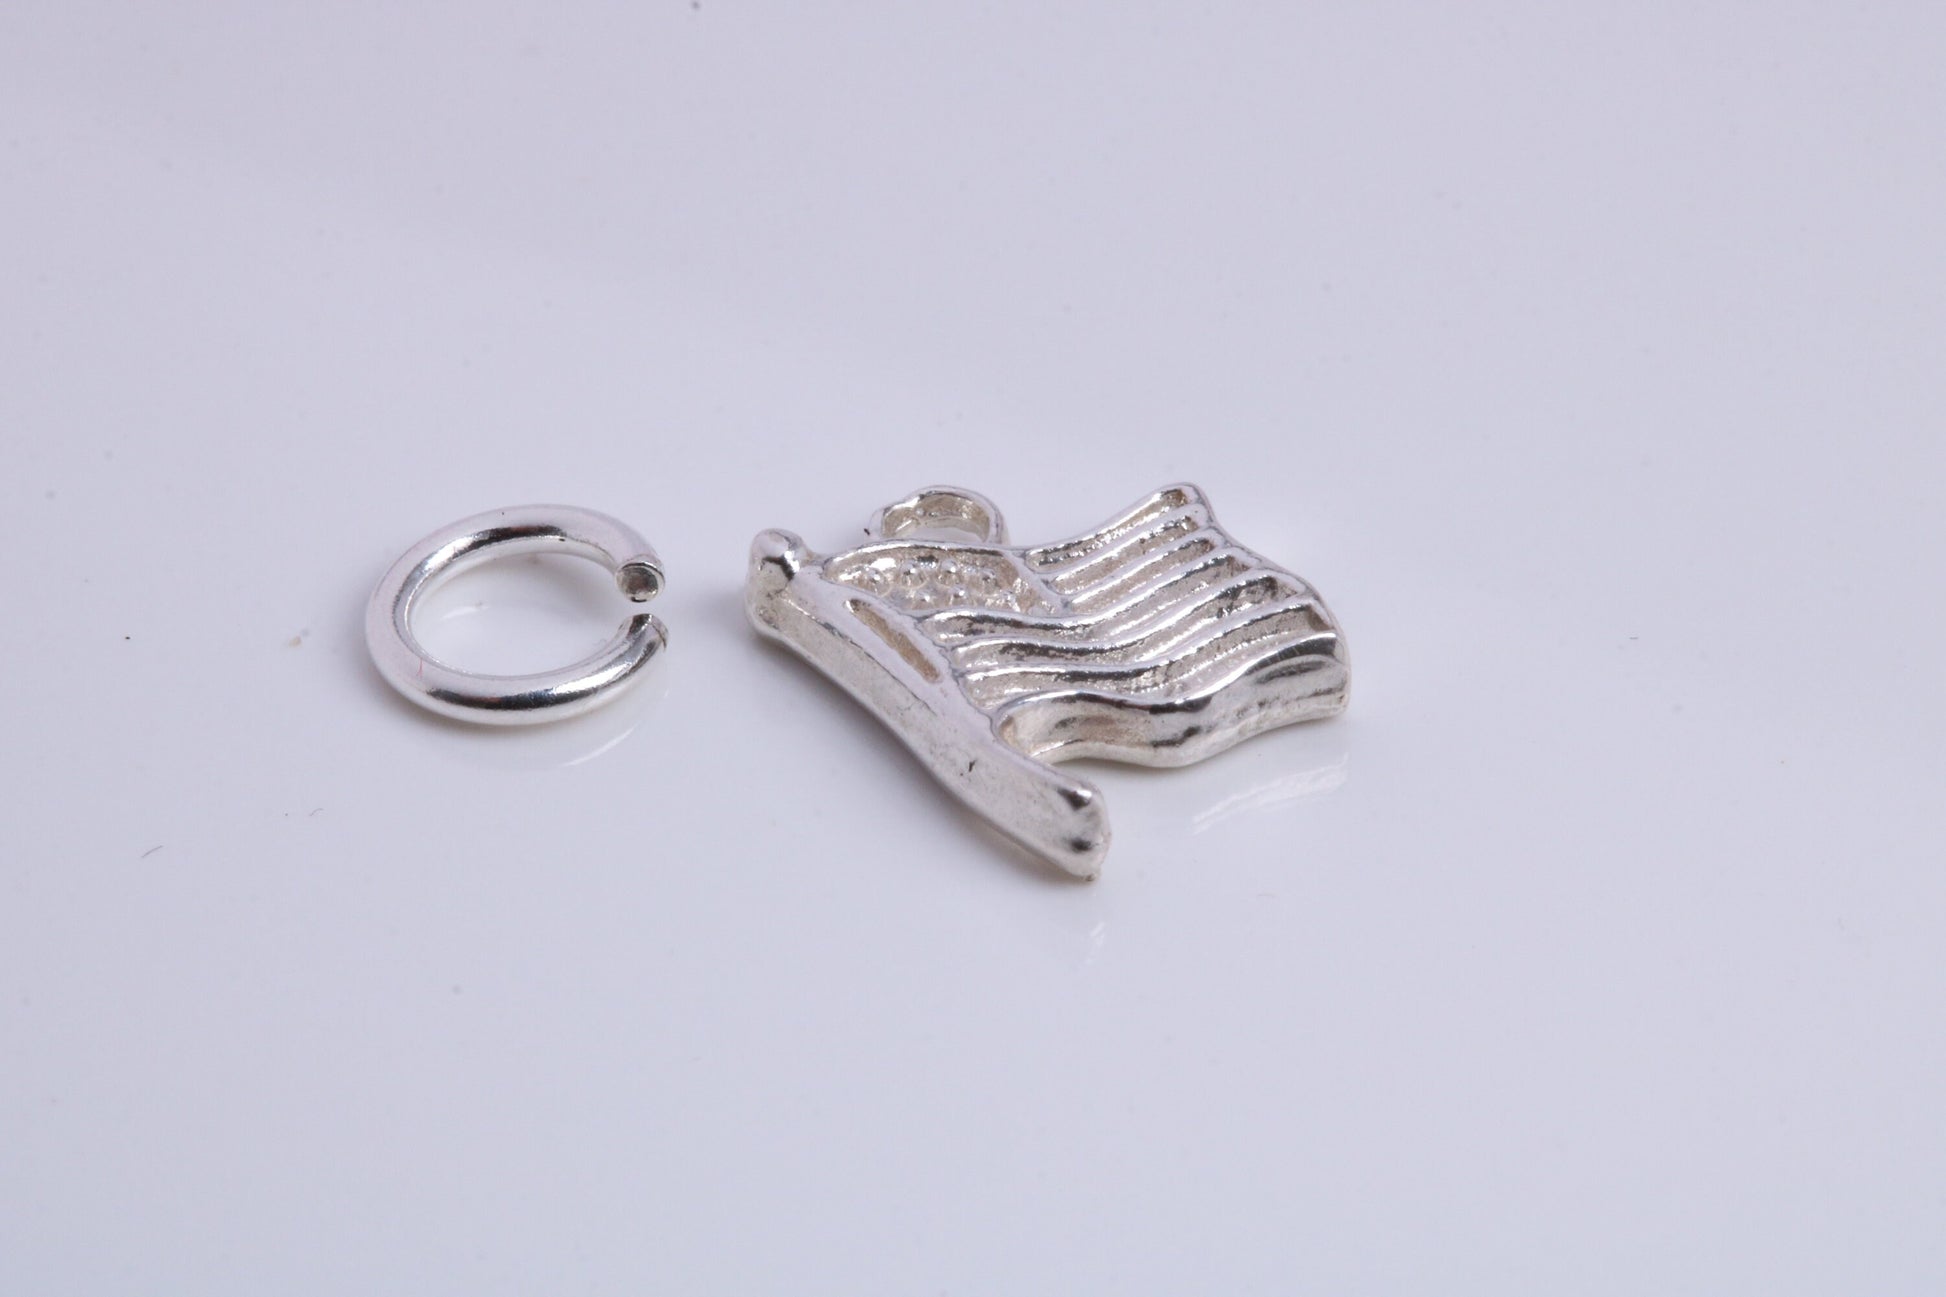 USA Flag Charm, Traditional Charm, Made from Solid 925 Grade Sterling Silver, Complete with Attachment Link